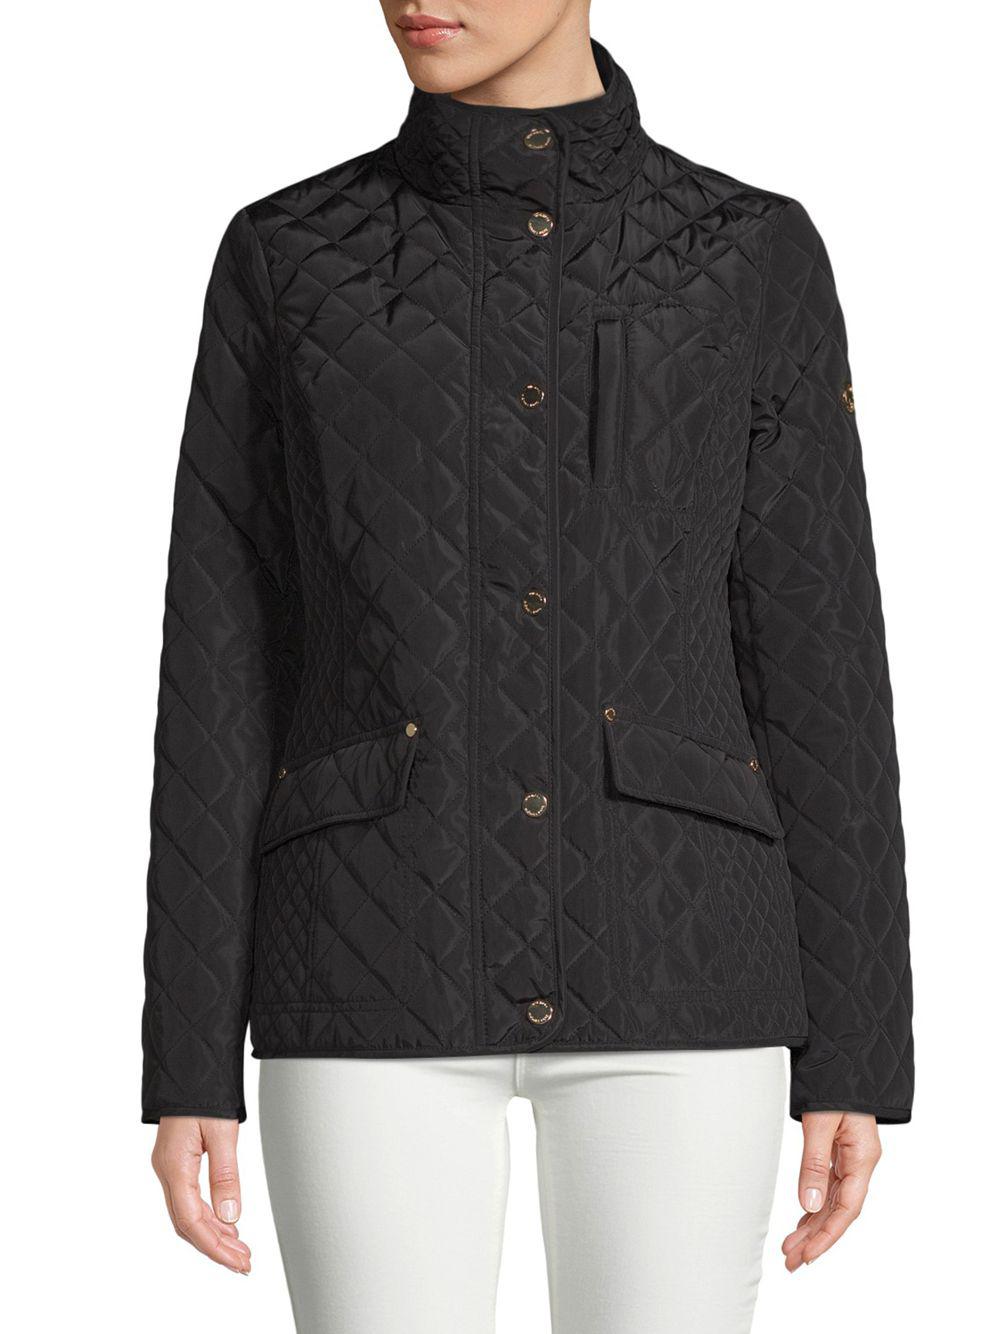 MICHAEL Michael Kors Synthetic Button-up Quilted Jacket in Black - Lyst